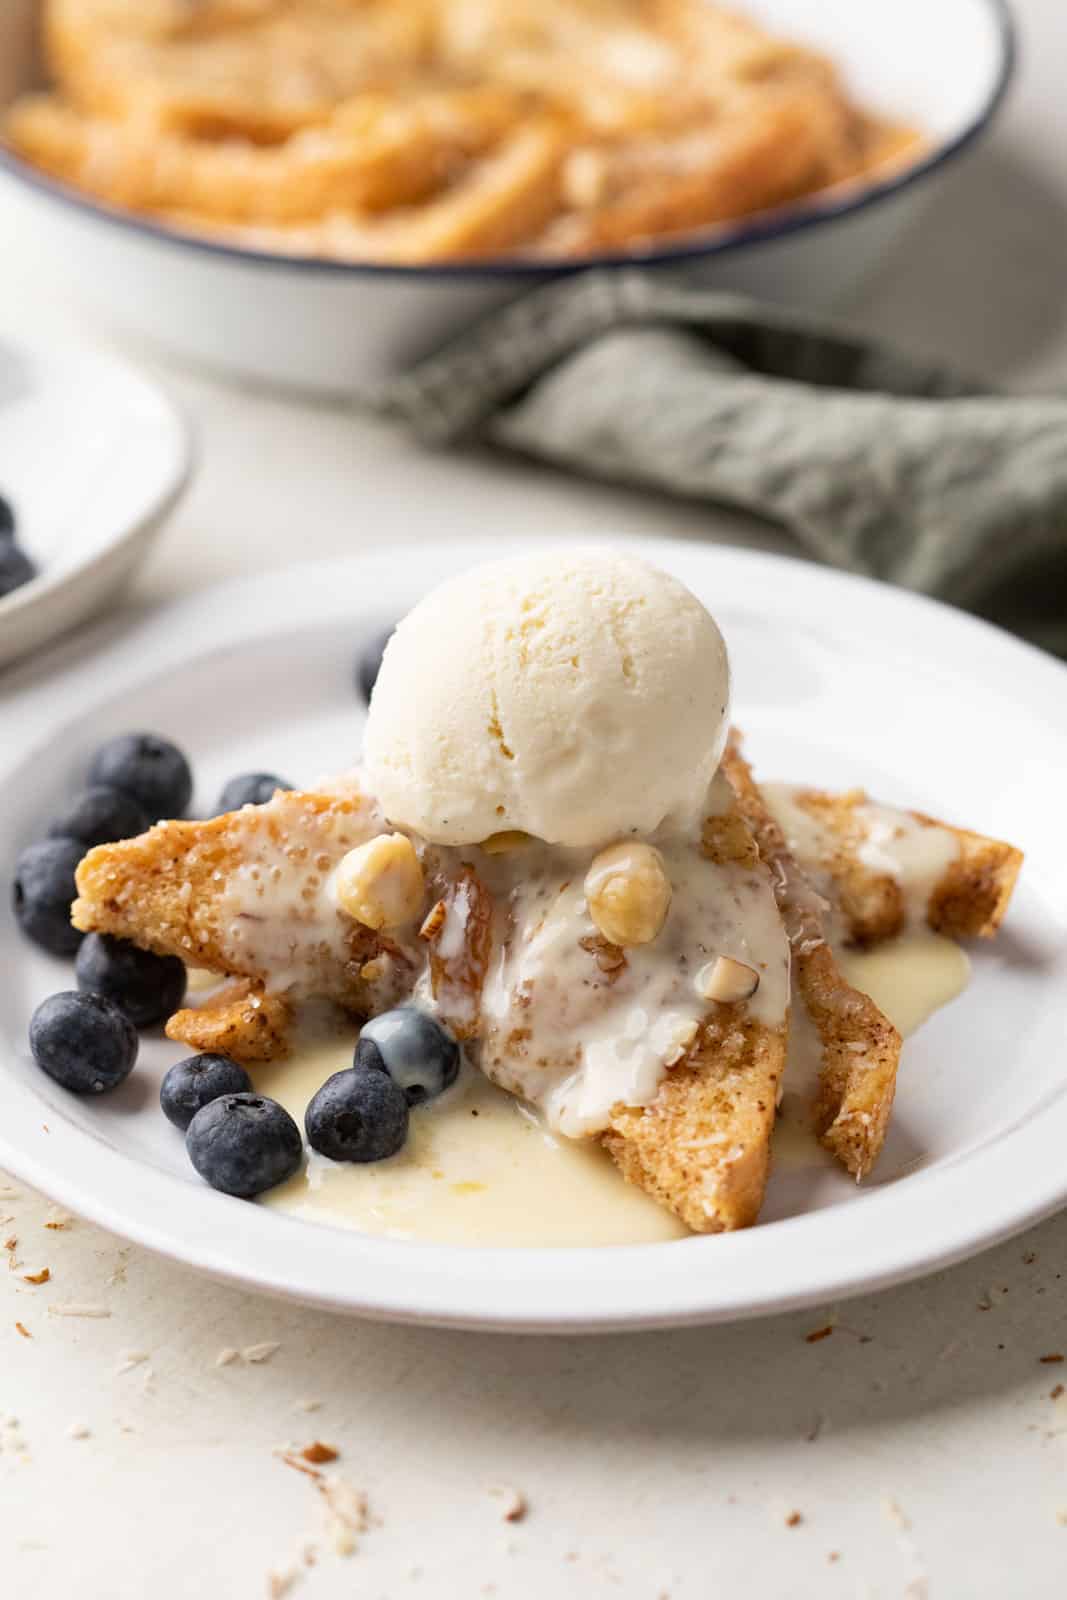 Cinnamon bread pudding served on a plate topped with rum custard sauce and a scoop of ice cream